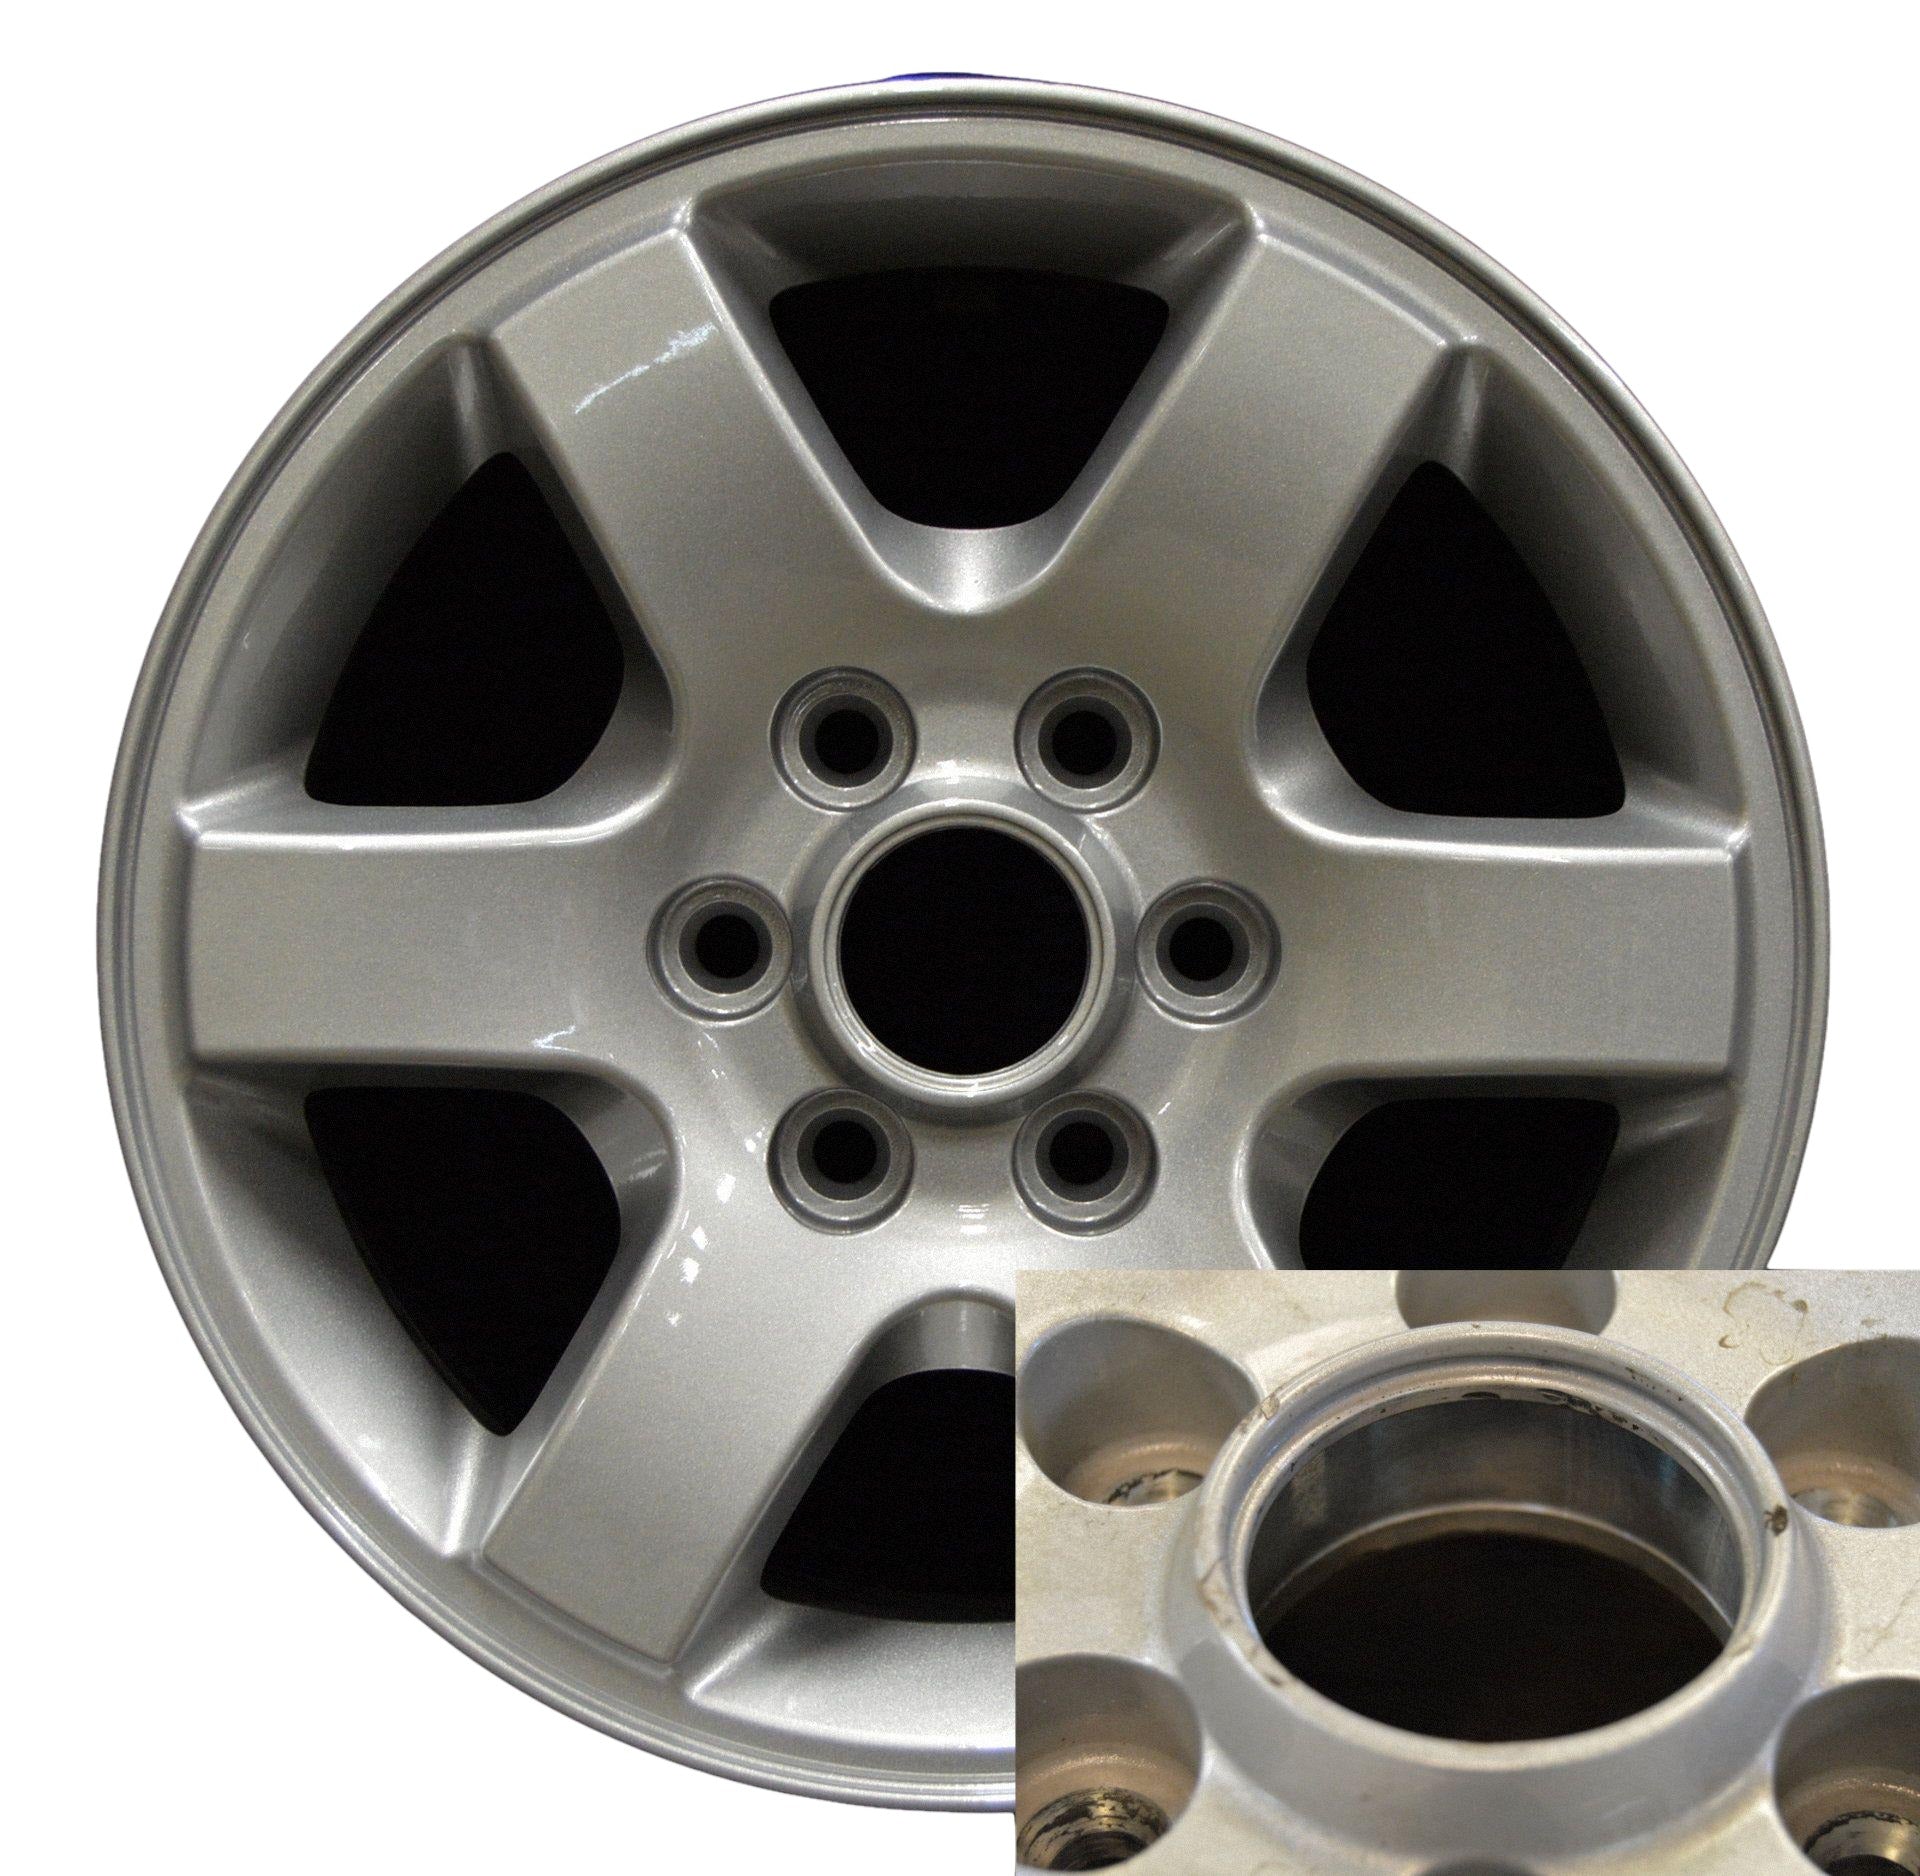 Ford Expedition  2007, 2008, 2009, 2010, 2011, 2012, 2013, 2014, 2015, 2016, 2017 Factory OEM Car Wheel Size 17x8 Alloy WAO.3661A.PS02.FF